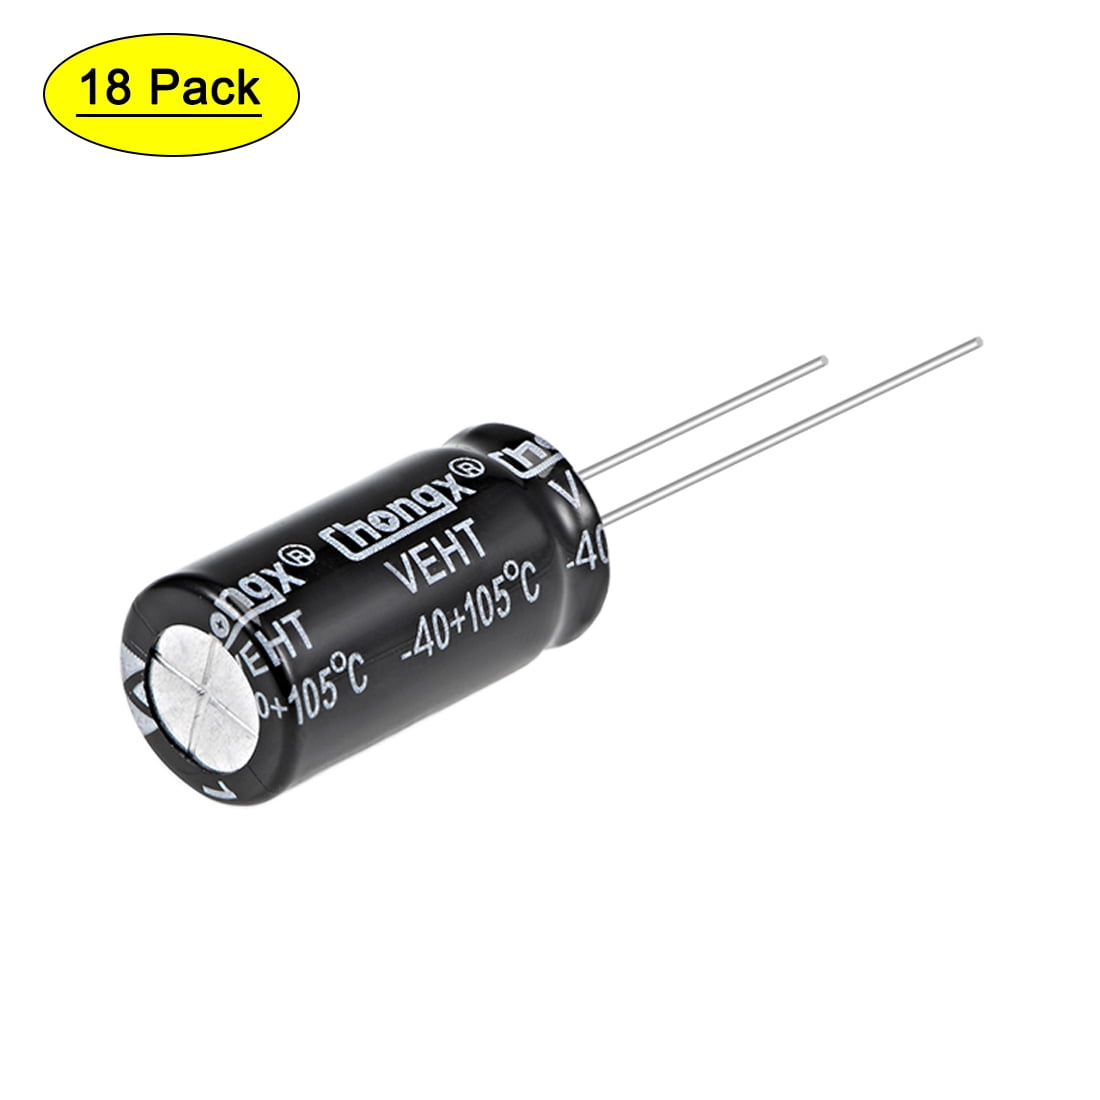 50V 4.7uF Electrolytic Radial Capacitors 105°C ±20%  5mm x 11mm  various pack